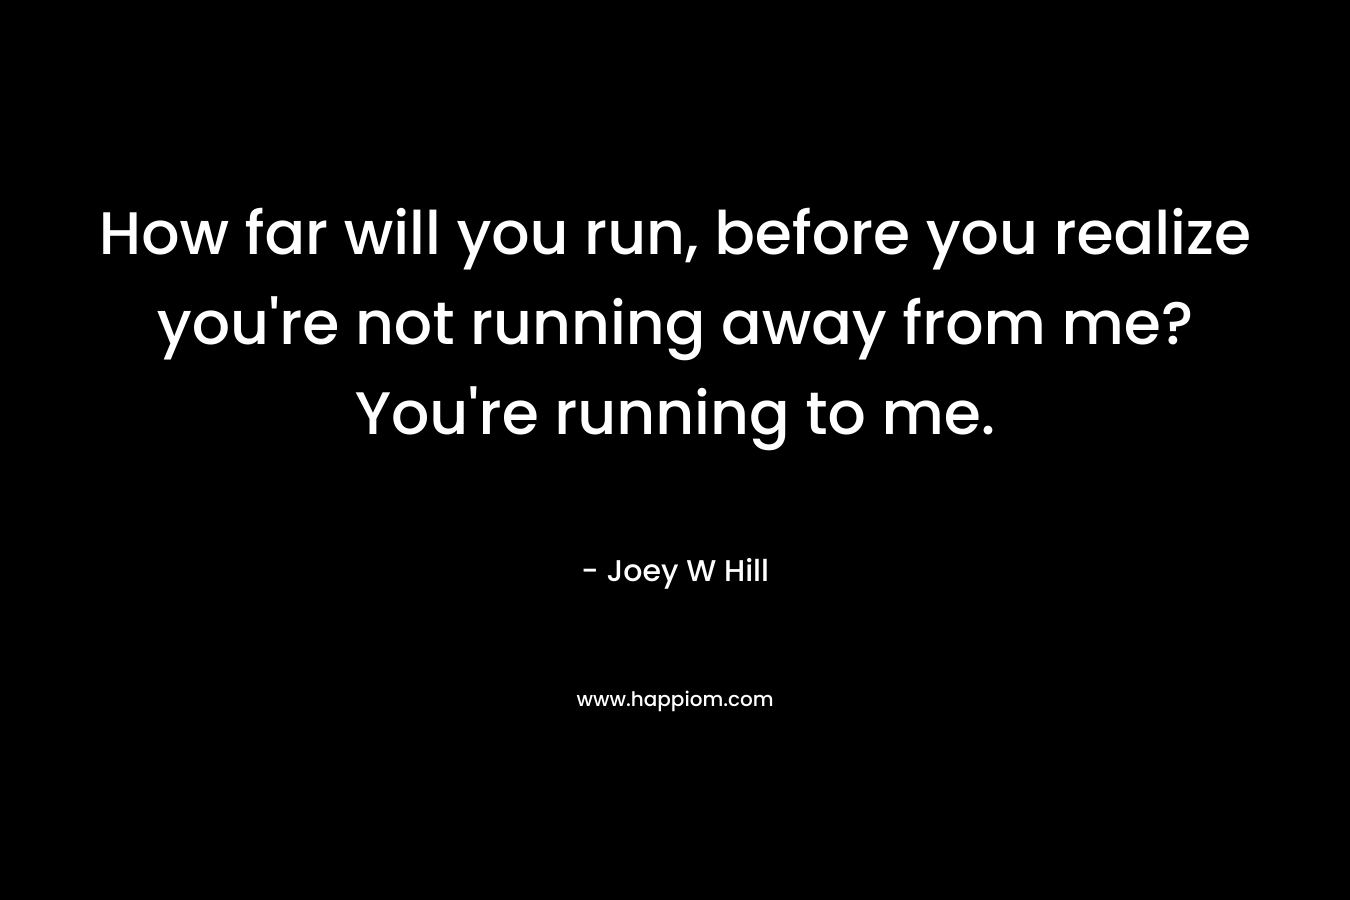 How far will you run, before you realize you're not running away from me? You're running to me.